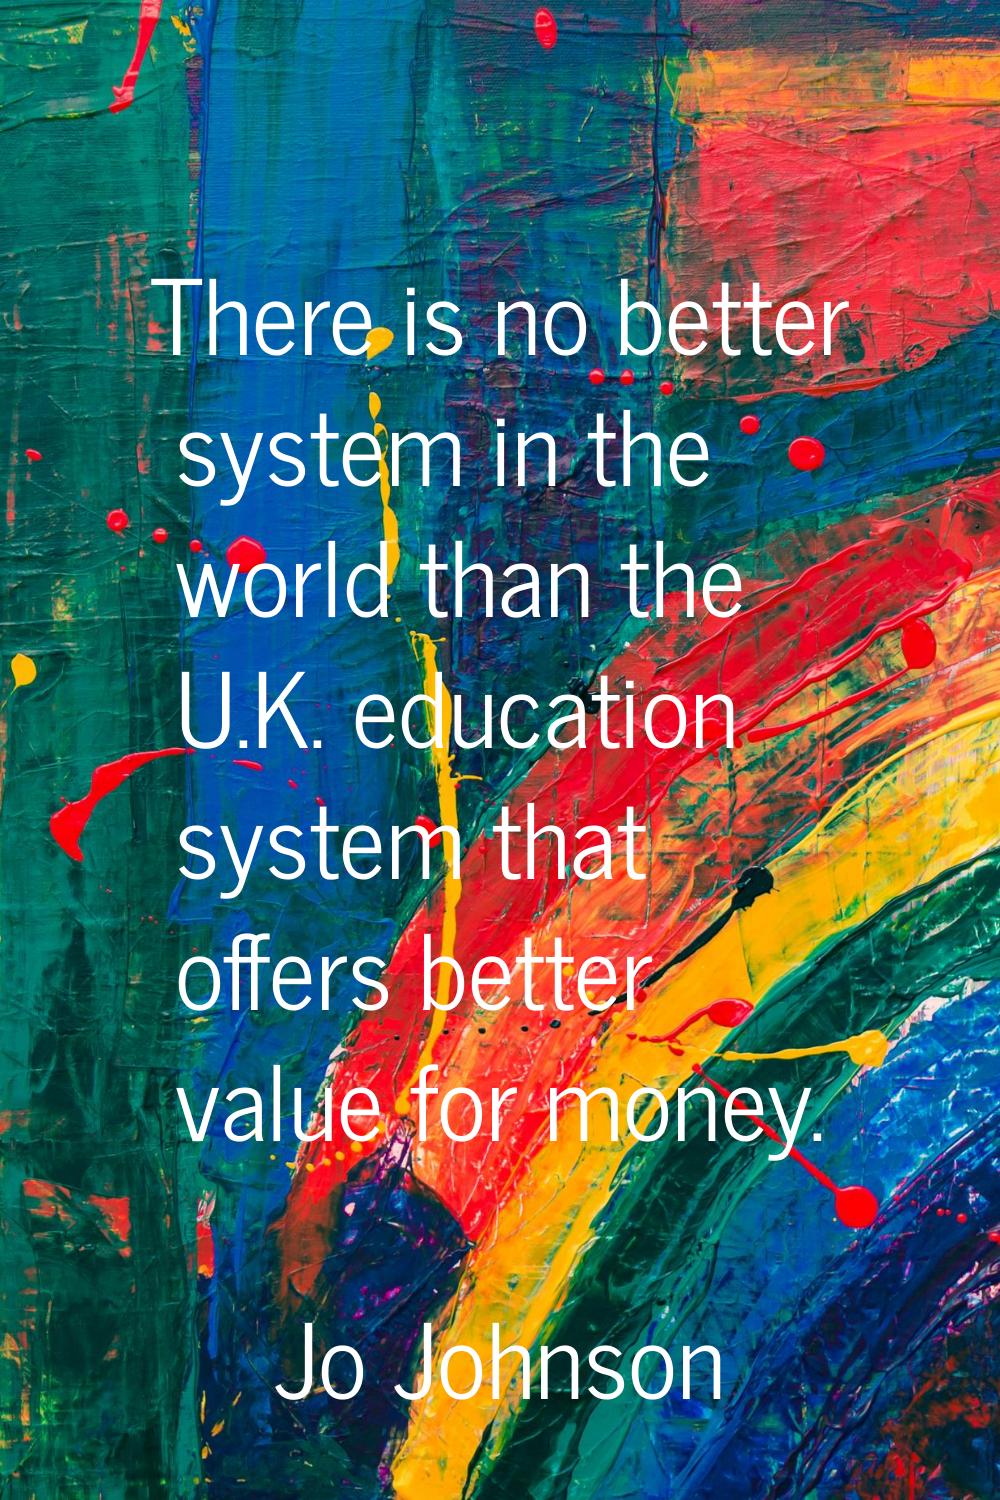 There is no better system in the world than the U.K. education system that offers better value for 